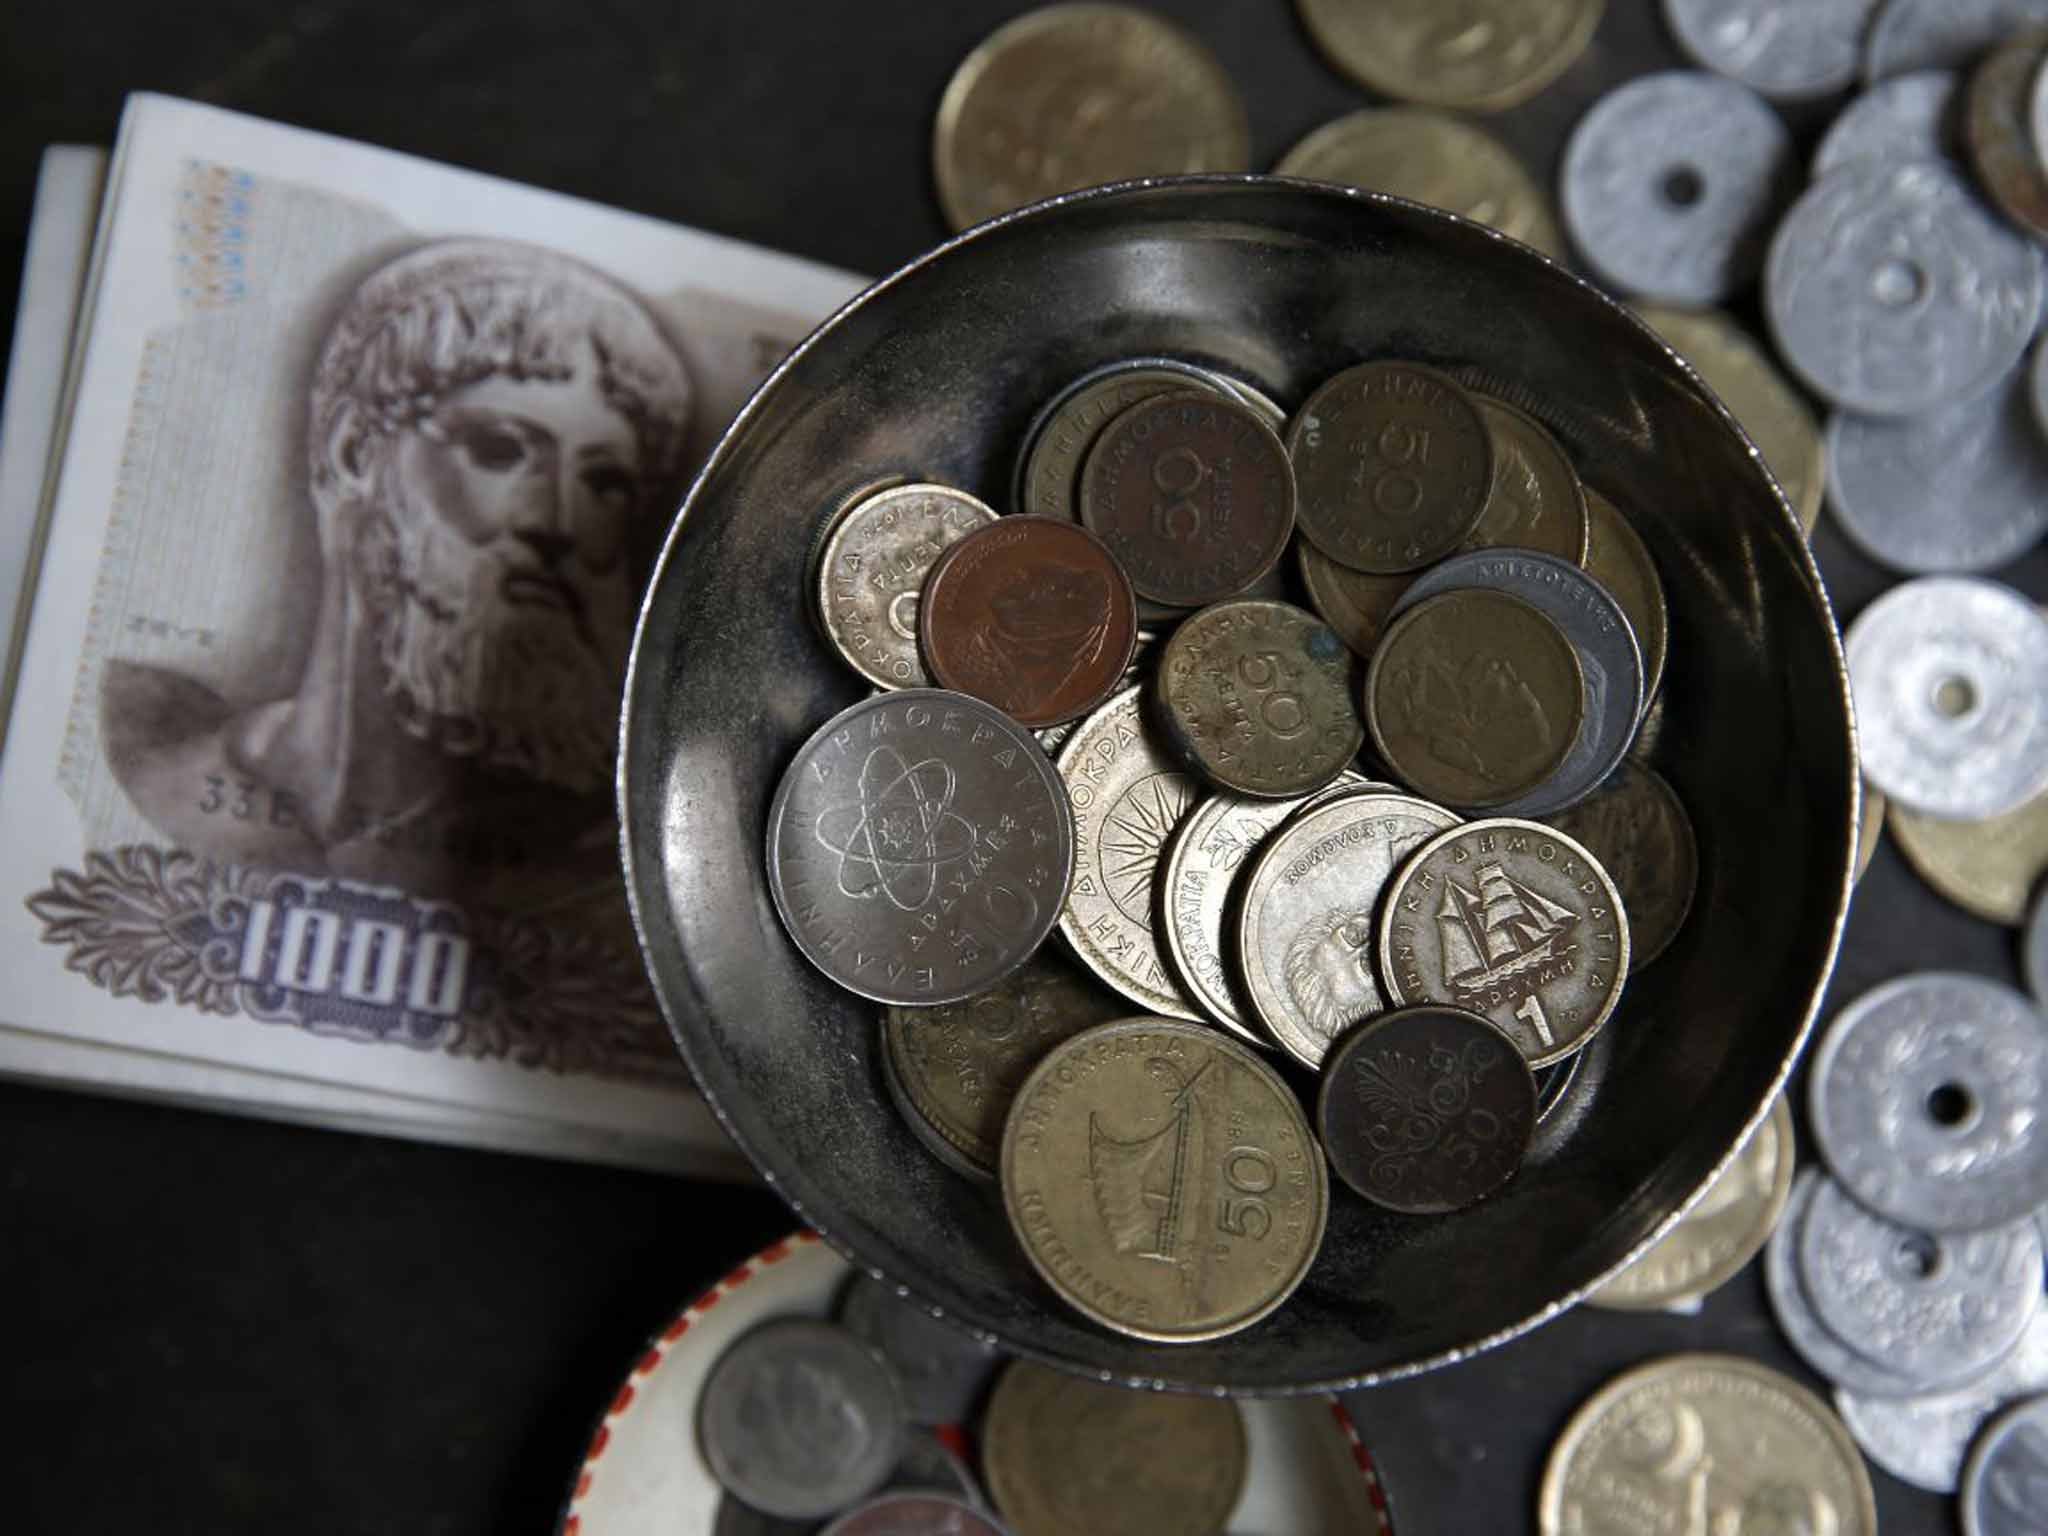 Back to drachma? Greece is still an enticing prospect